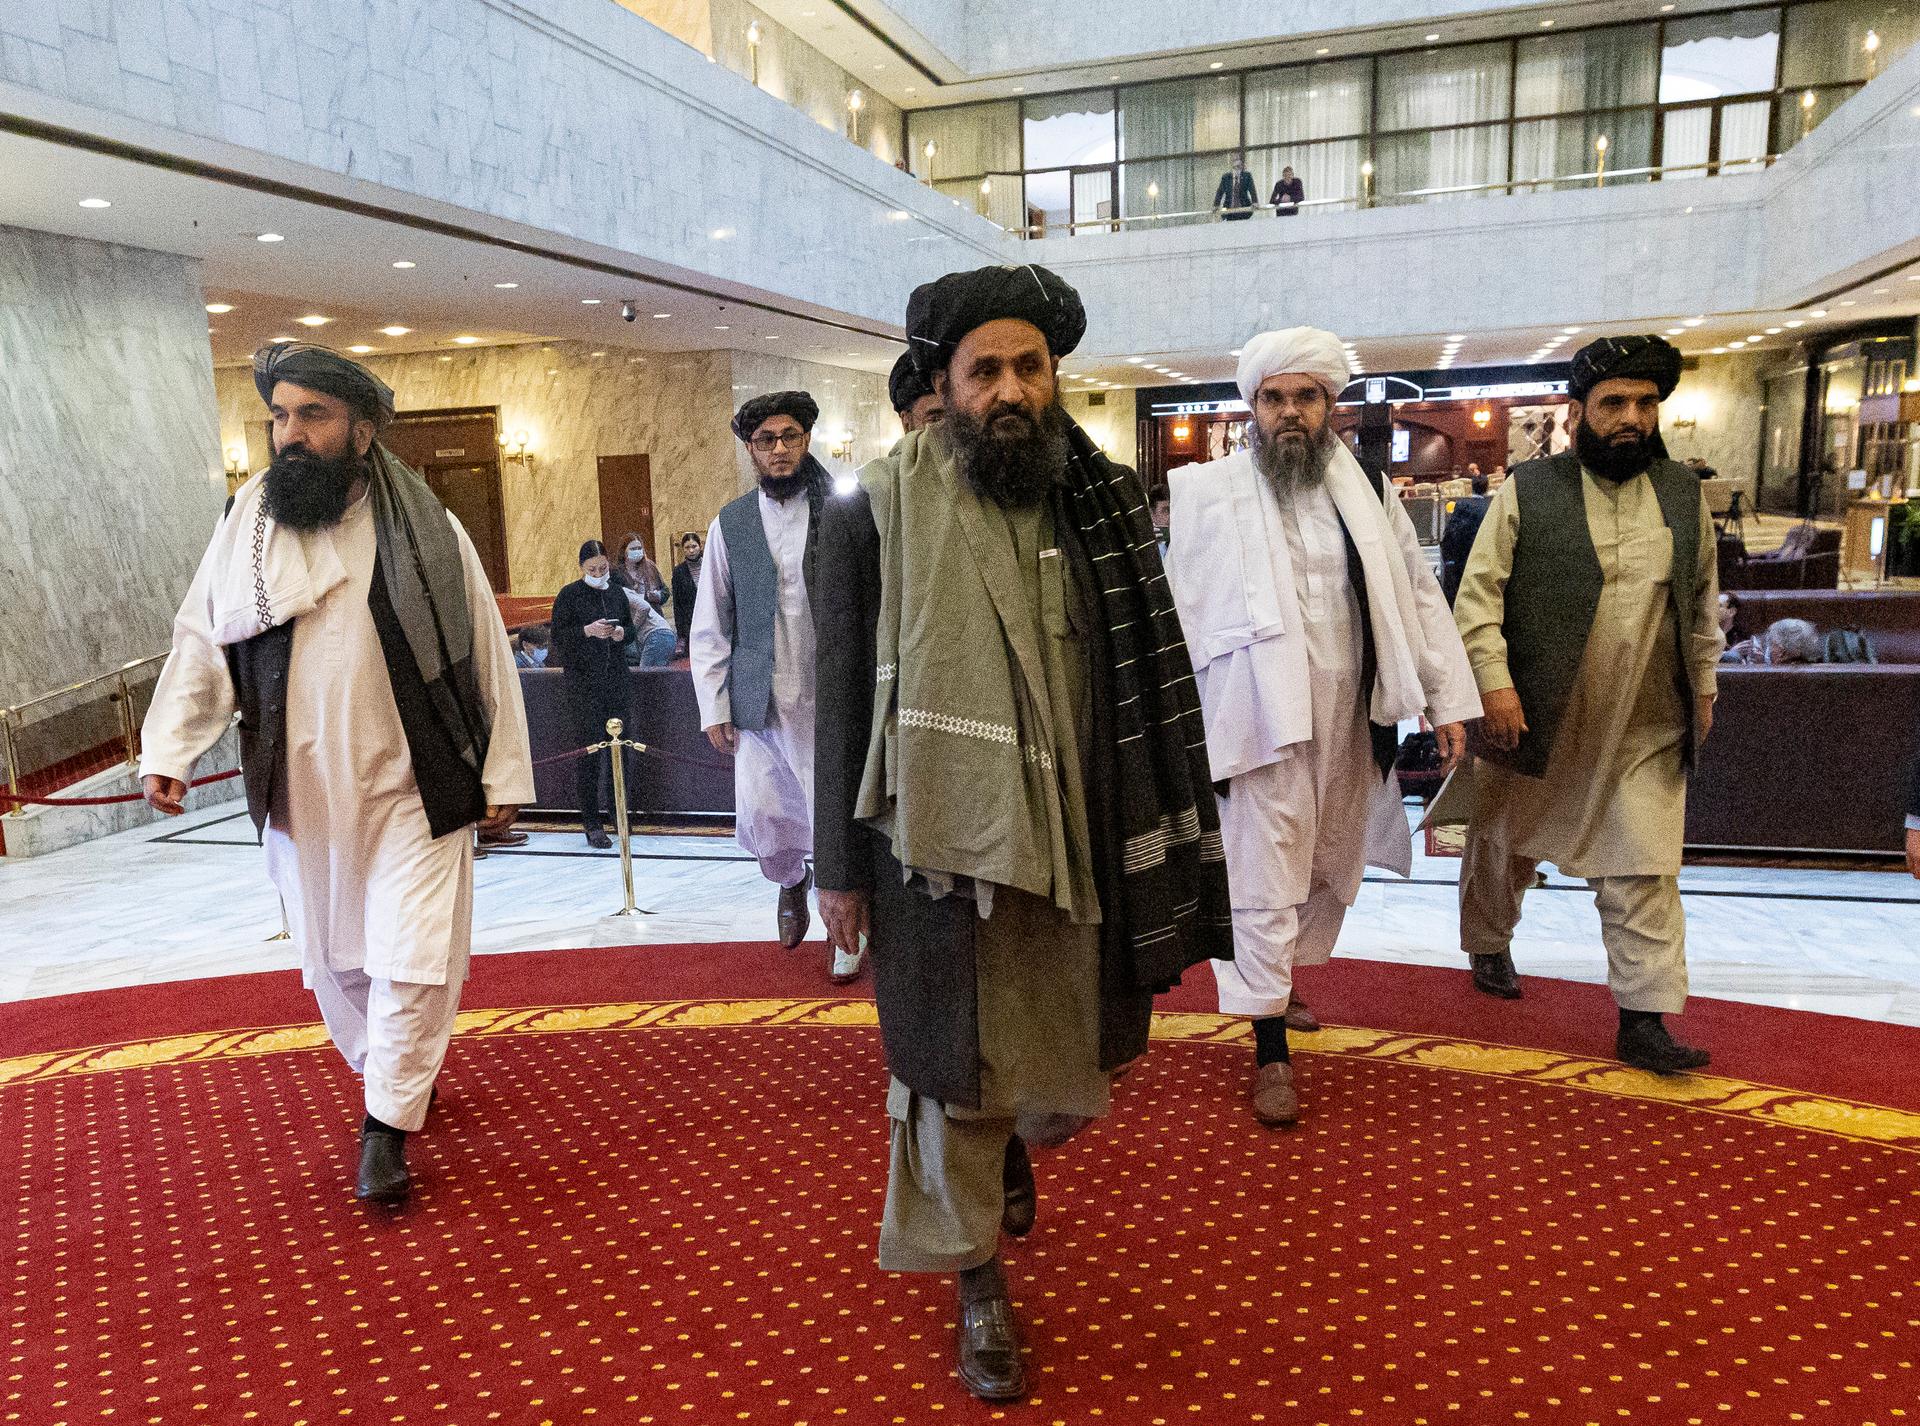 A group of men wearing Afghan traditional clothes walk across a reddish carpet in a lobby.